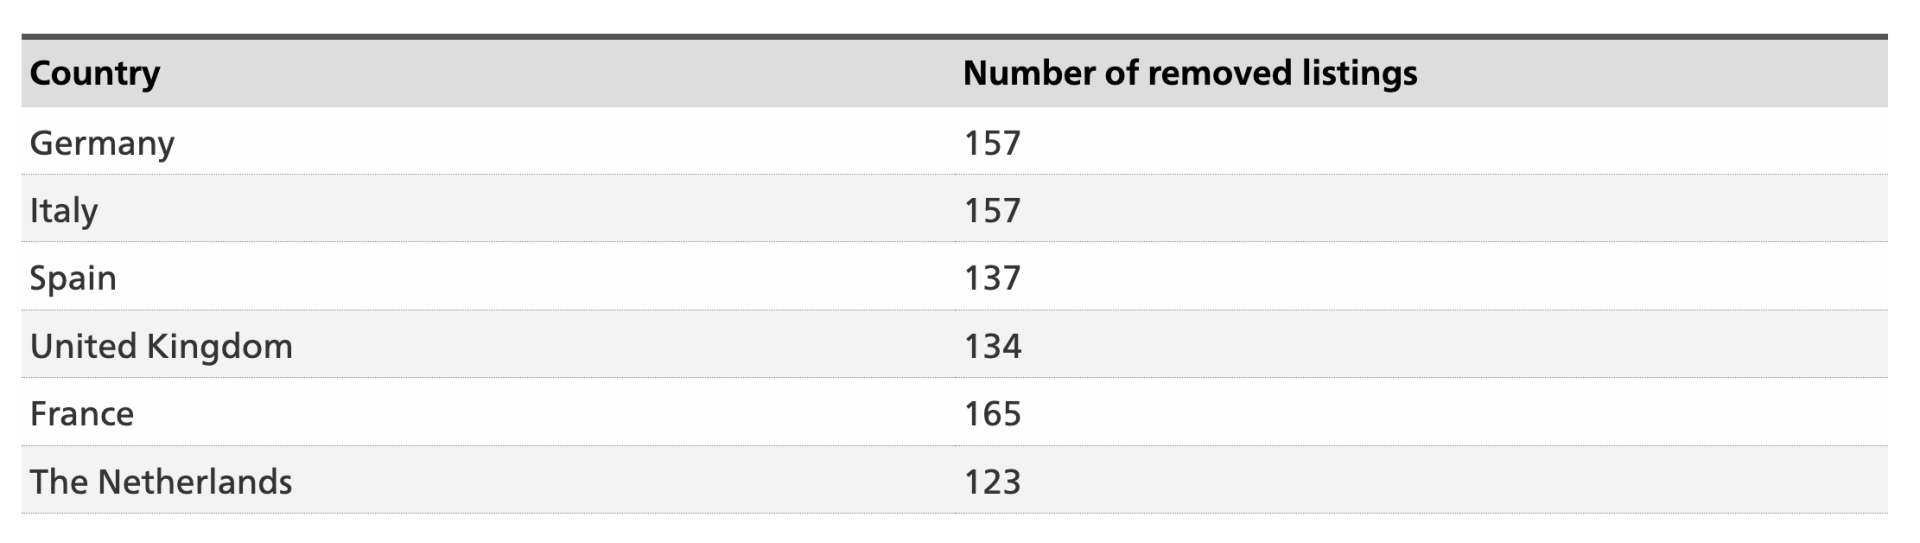 Canon publishes quarterly listing removals tally - The Recycler - 20/04/2023